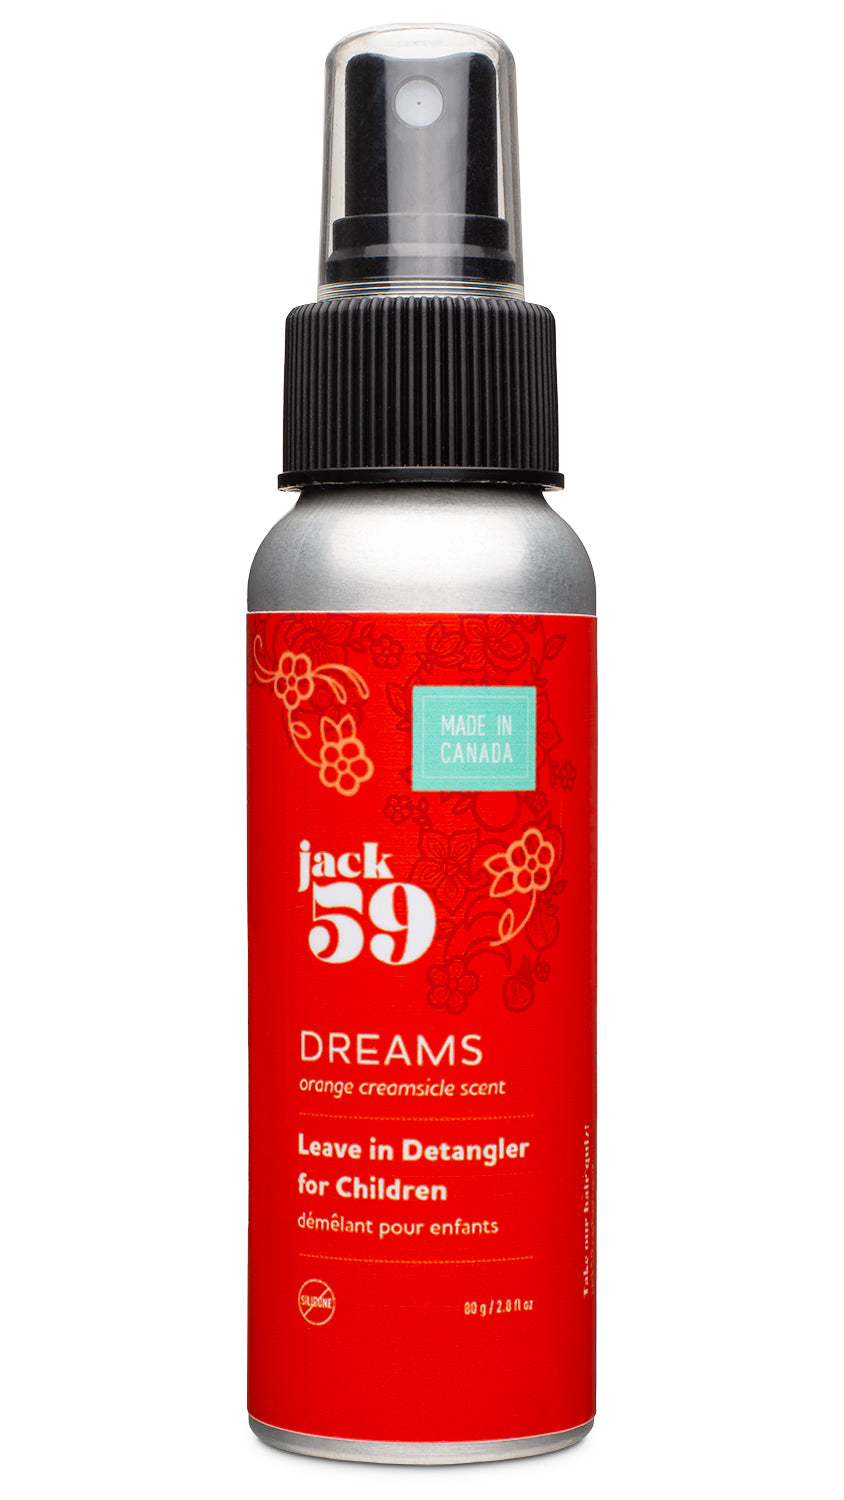 The 80g travel size leave in detangler is safe for all hair and skin and always silicone, paraben and sulphate free.